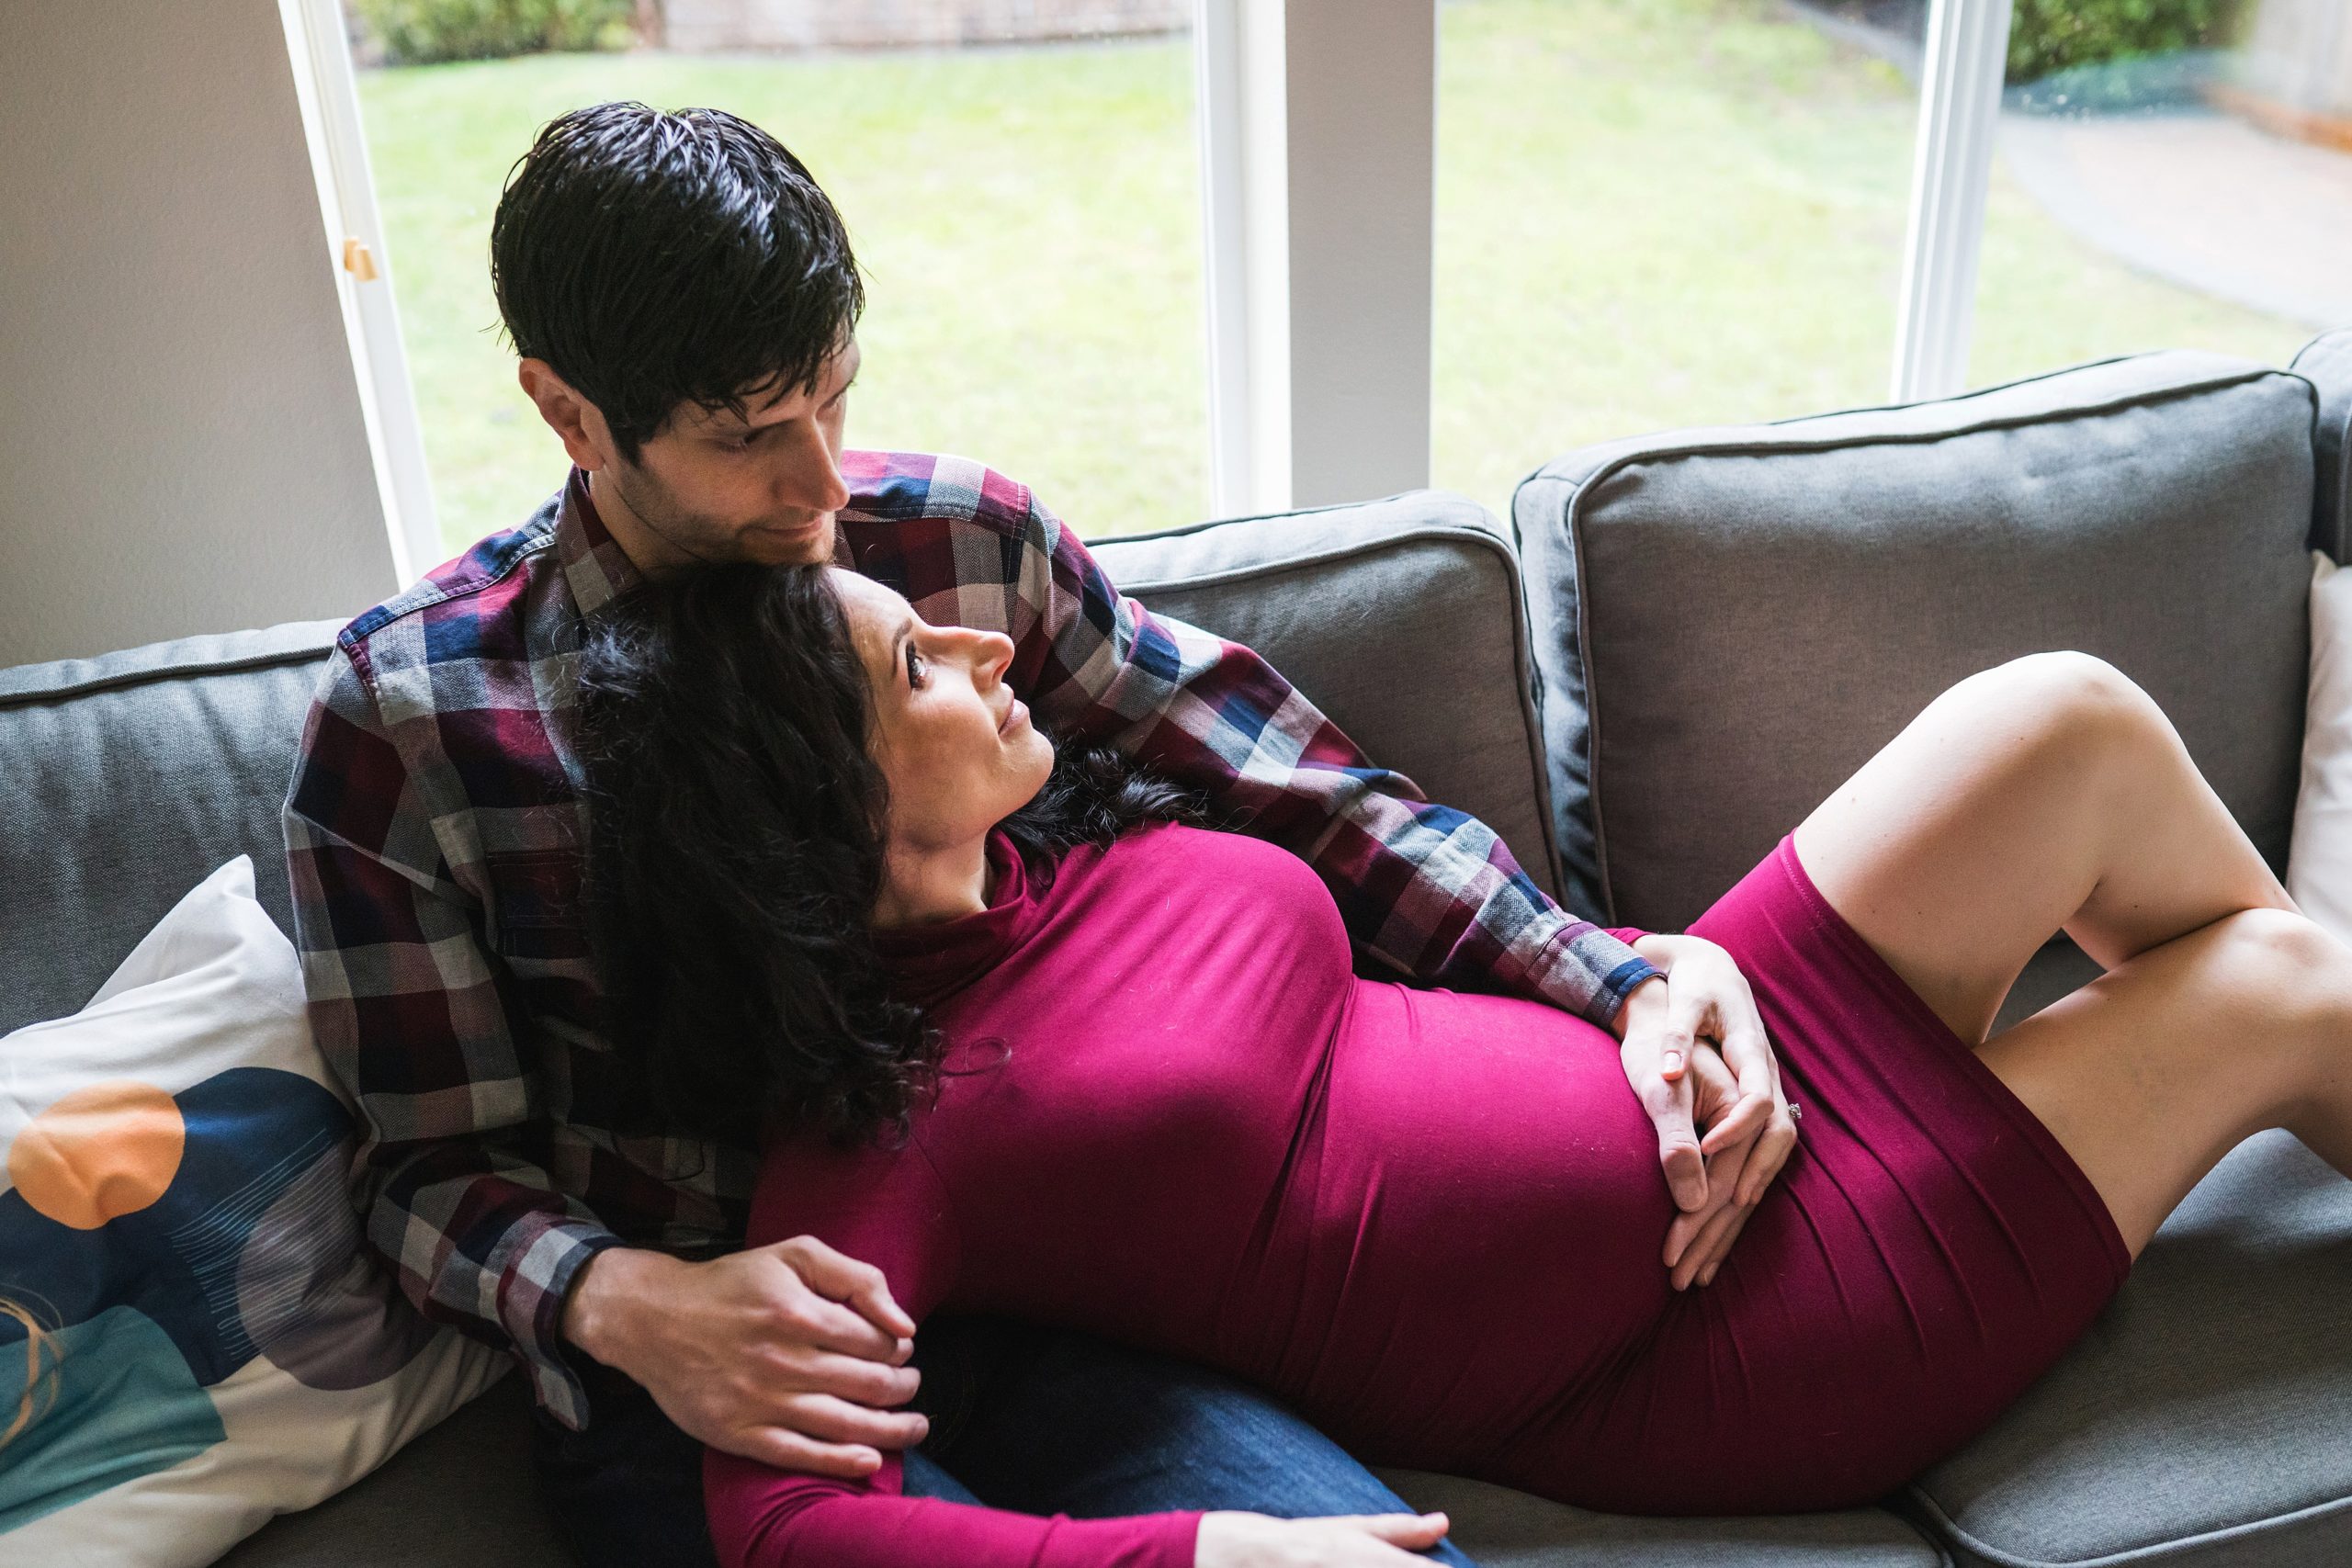 Seattle area In home maternity shoot, husband and pregnant wife together on couch